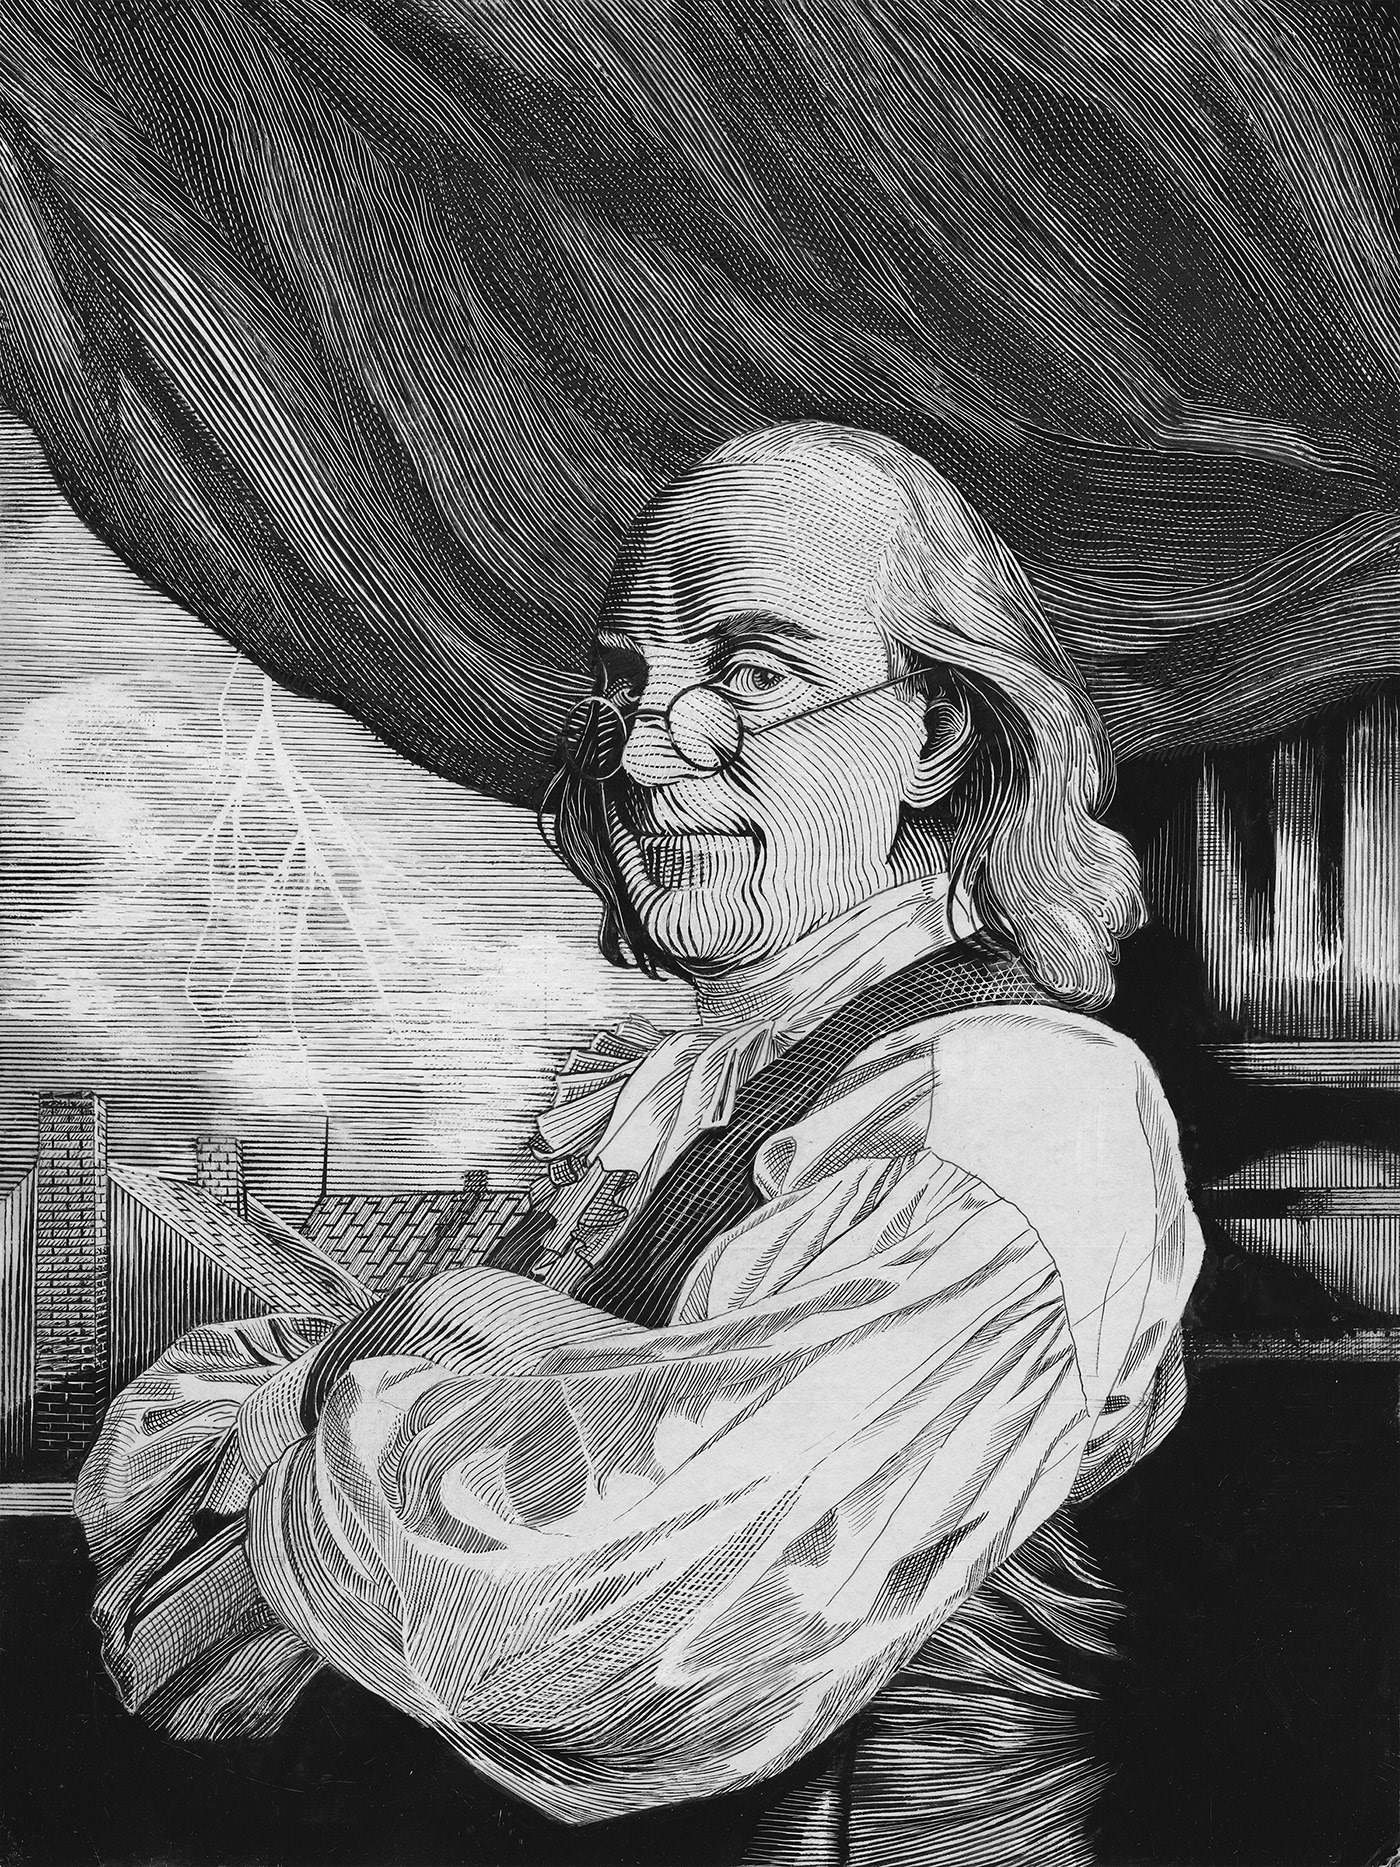 Benjamin Franklin black and white clayboard Drawing  engraving hand drawn line art pen and ink scratchboard woodcut